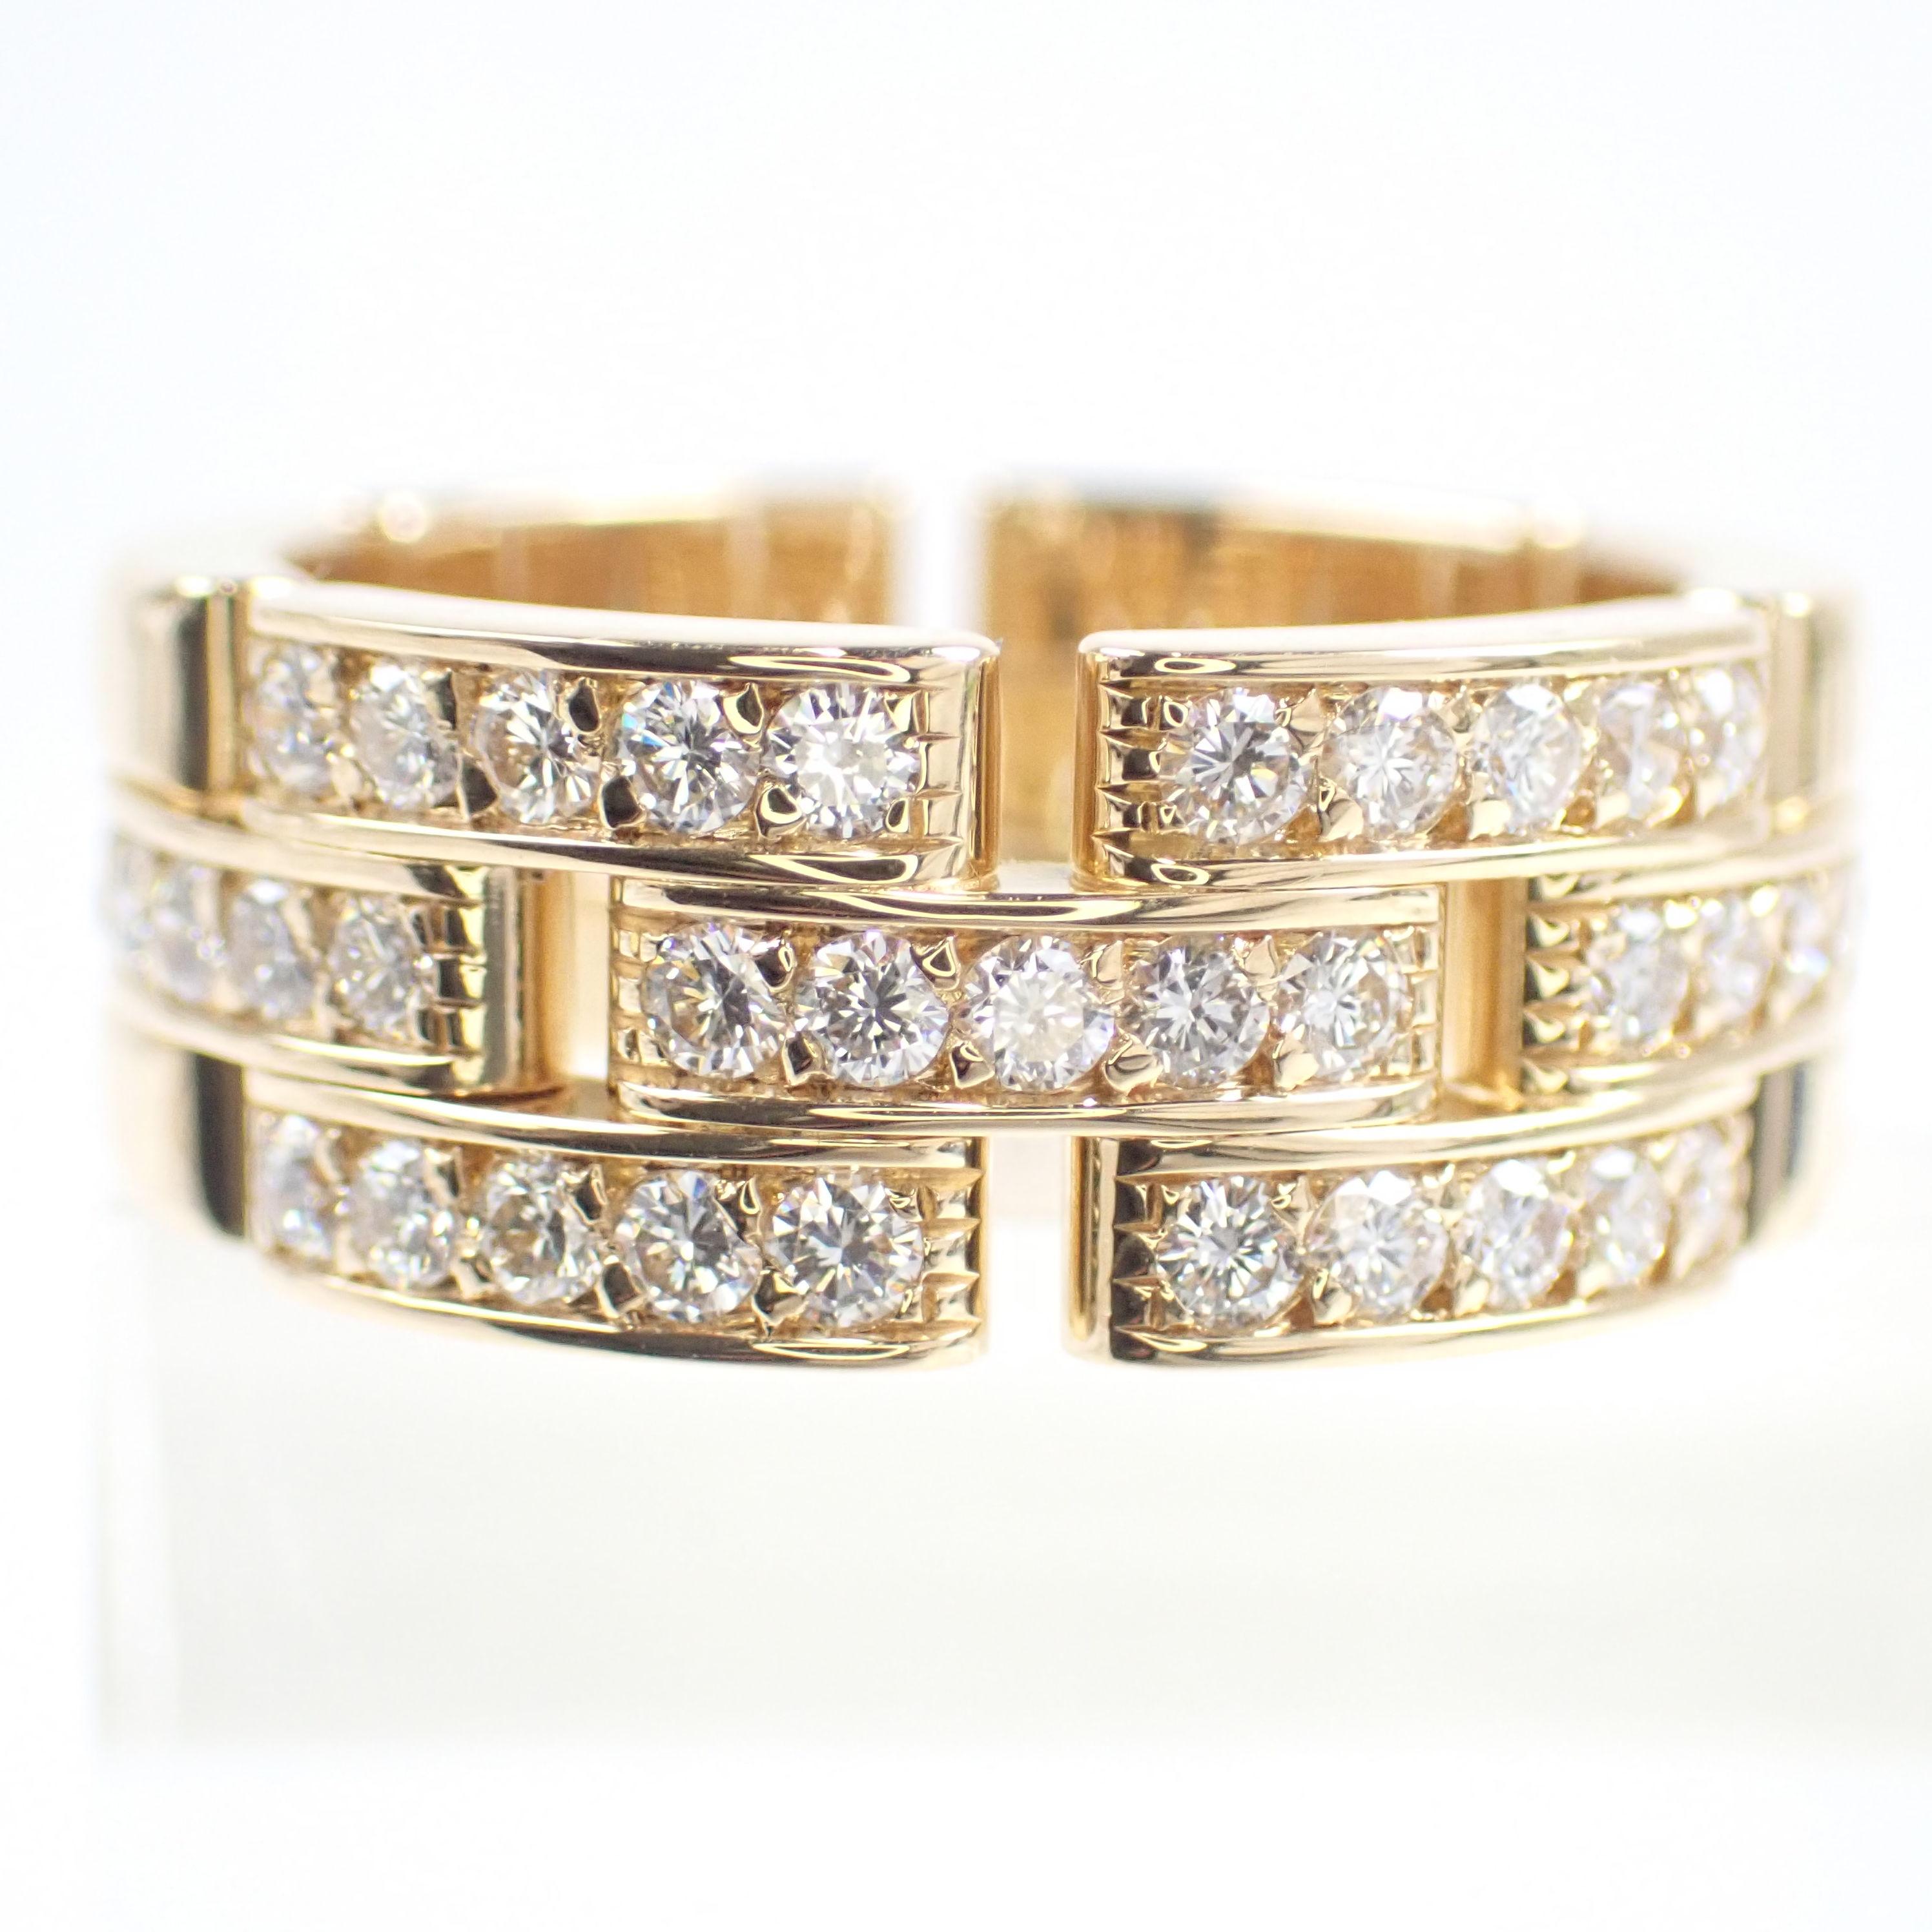 Brand : Cartier
Description: Panthere Ring Half Diamond 
Metal Type: 750 (YG) /  Yellow Gold
Total Weight: 12.5g
Size: 54
Diamonds: Thirty five
Diamonds Weight: 0.53ct
Width: 7.8 mm
Condition: Preowned; small signs of wearing
Box -  Not